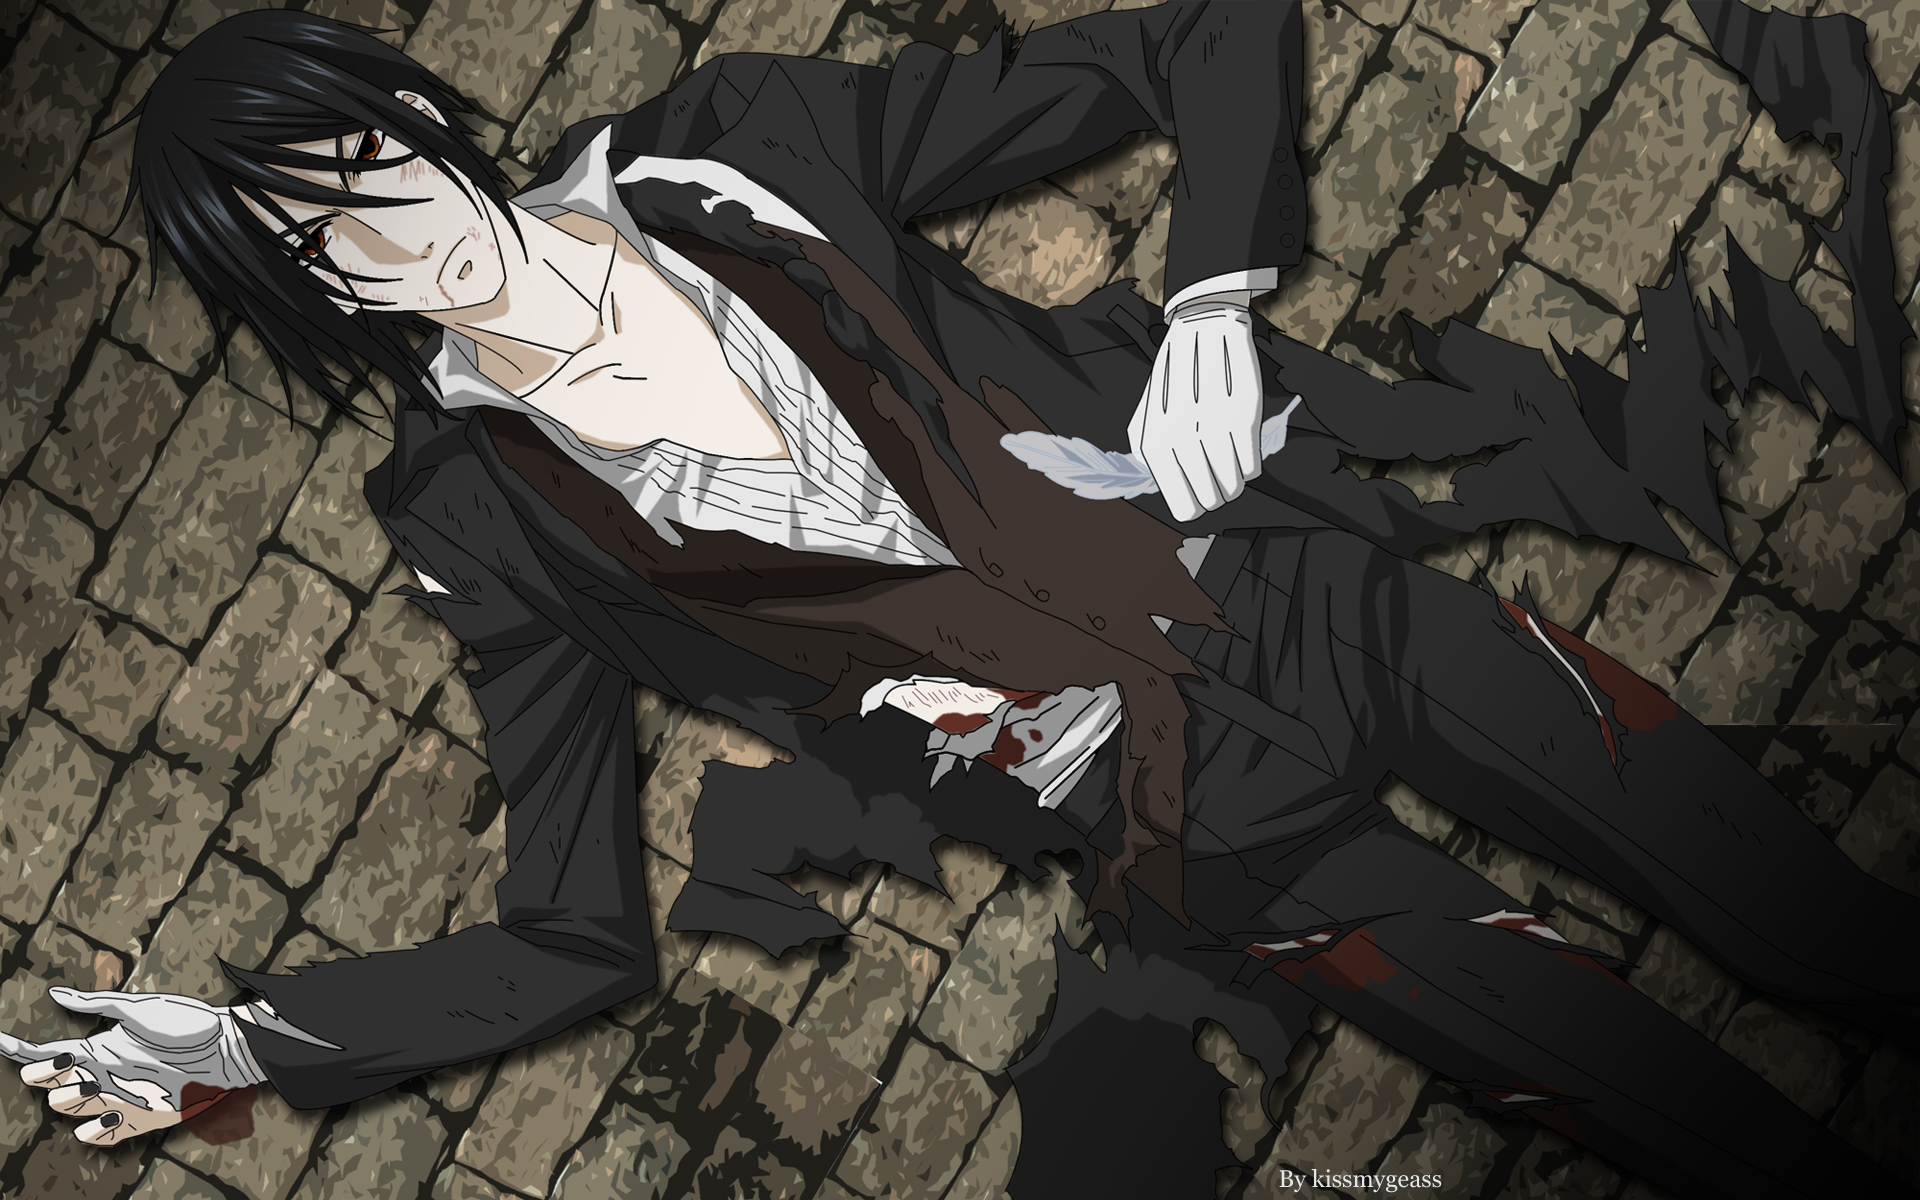 Anime character from Black Butler, staring intently with a determined expression against a dark background.